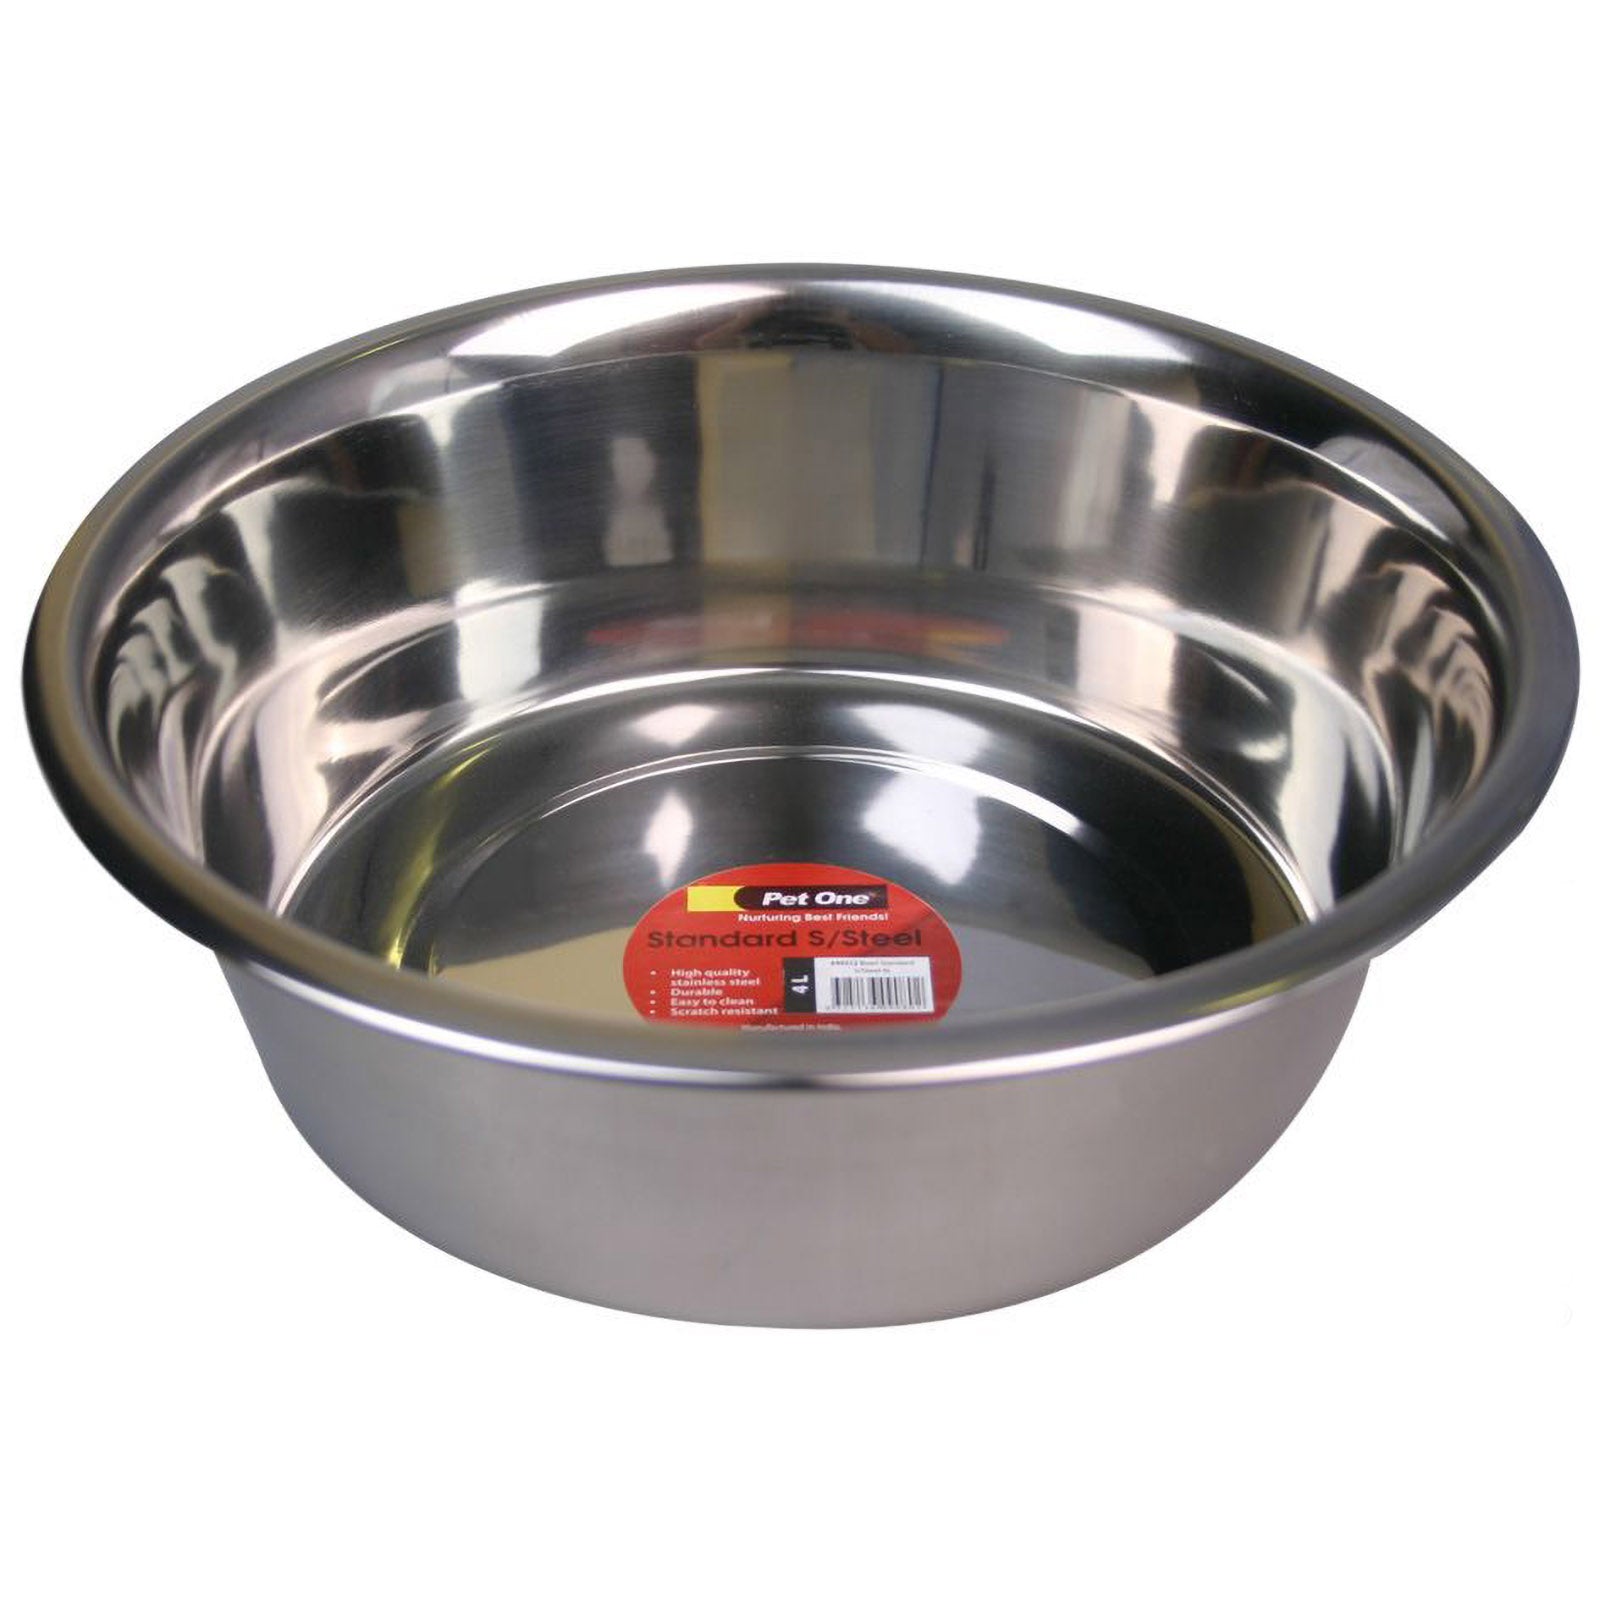 Pet One Stainless Steel Dog Bowl